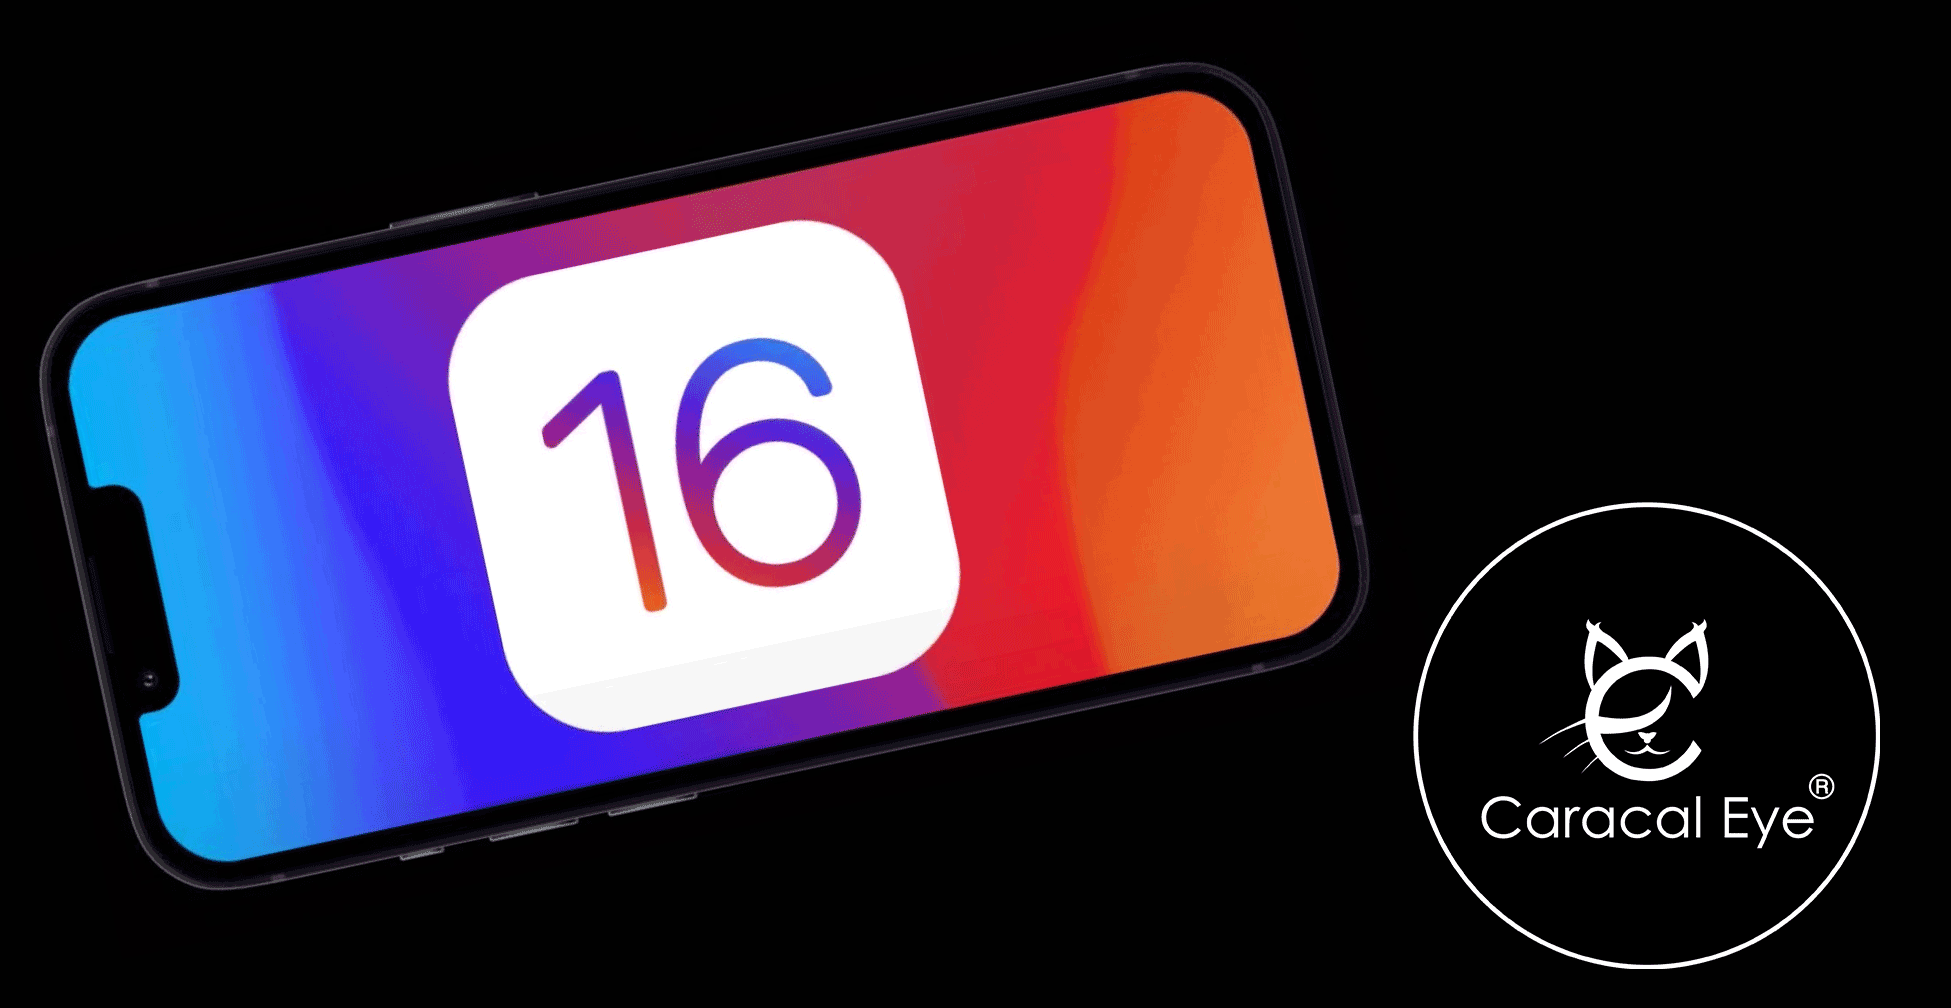 Features of the iPhone 16 Pro